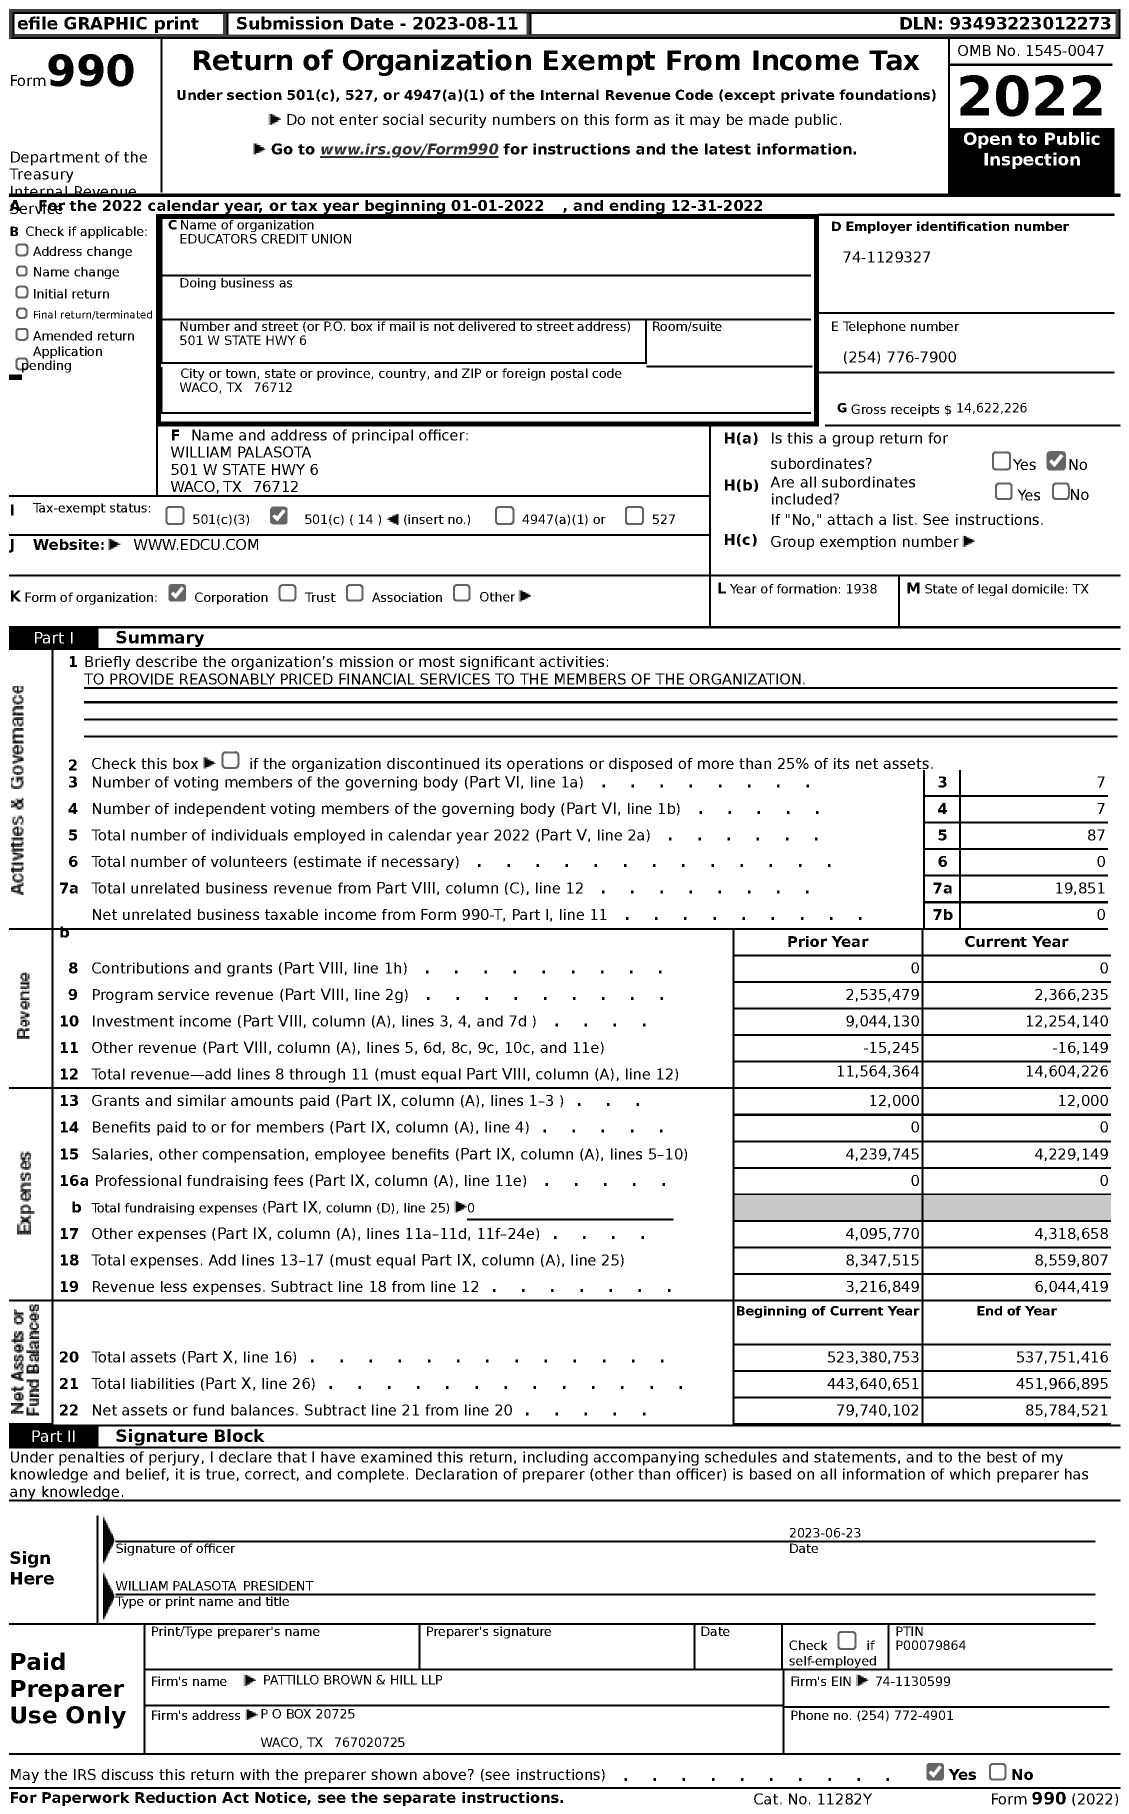 Image of first page of 2022 Form 990 for Educators Credit Union (ECU)